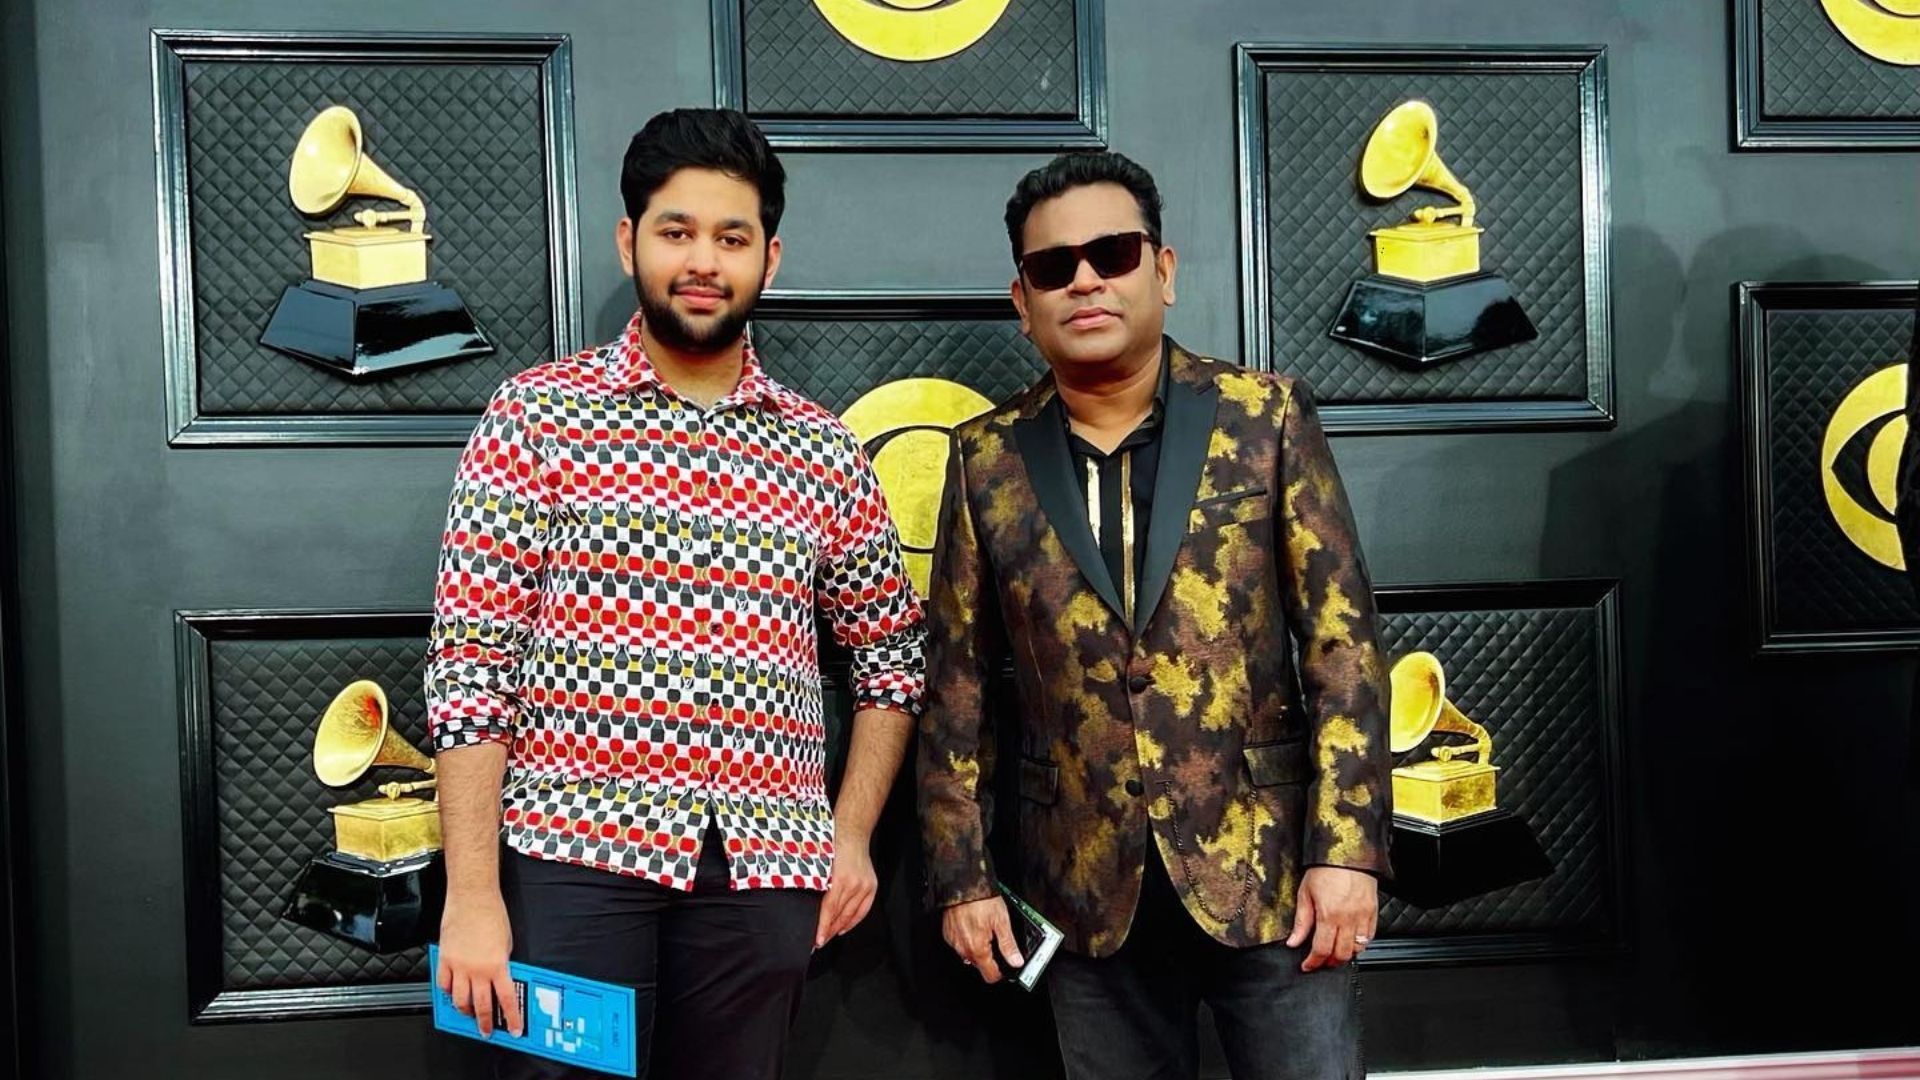 Indian artists who have won the Grammys over the years